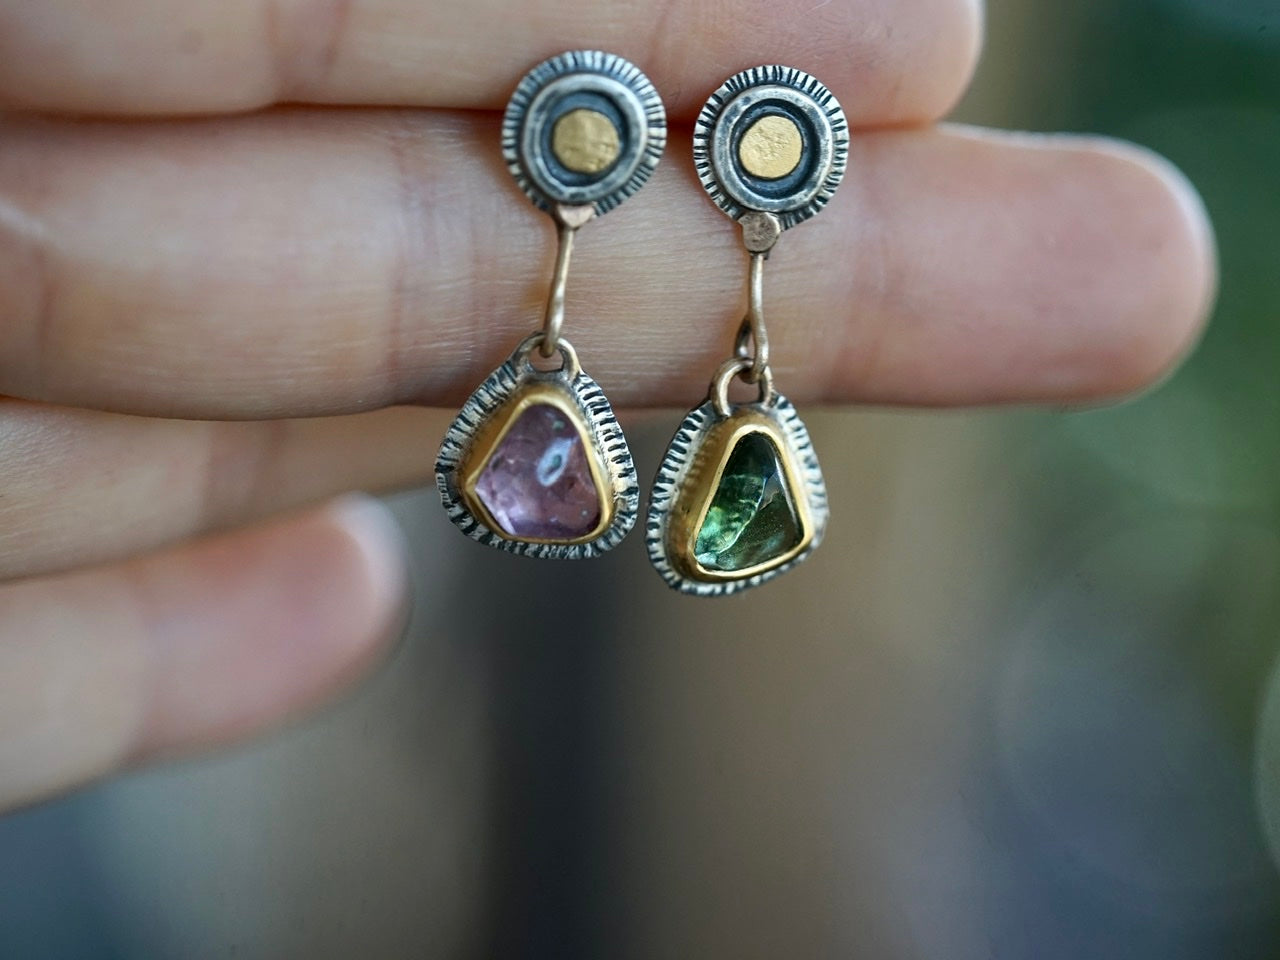 Asymmetrical tourmaline and spinel post earrings with gold